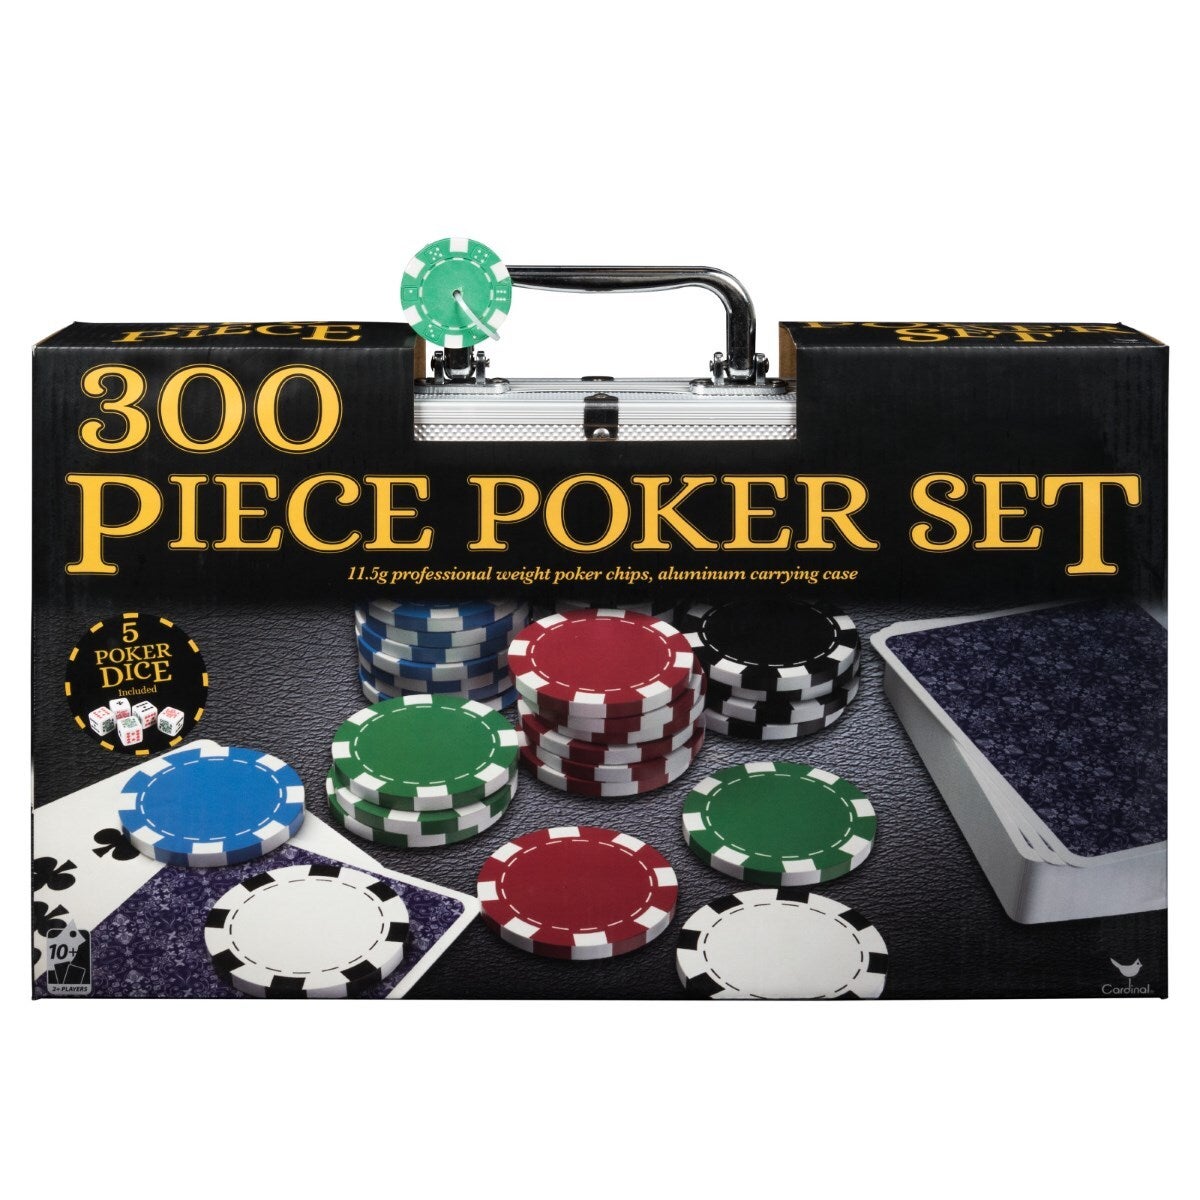 Cardinal Poker Set 300 Piece With 11.5g Chips In Tin